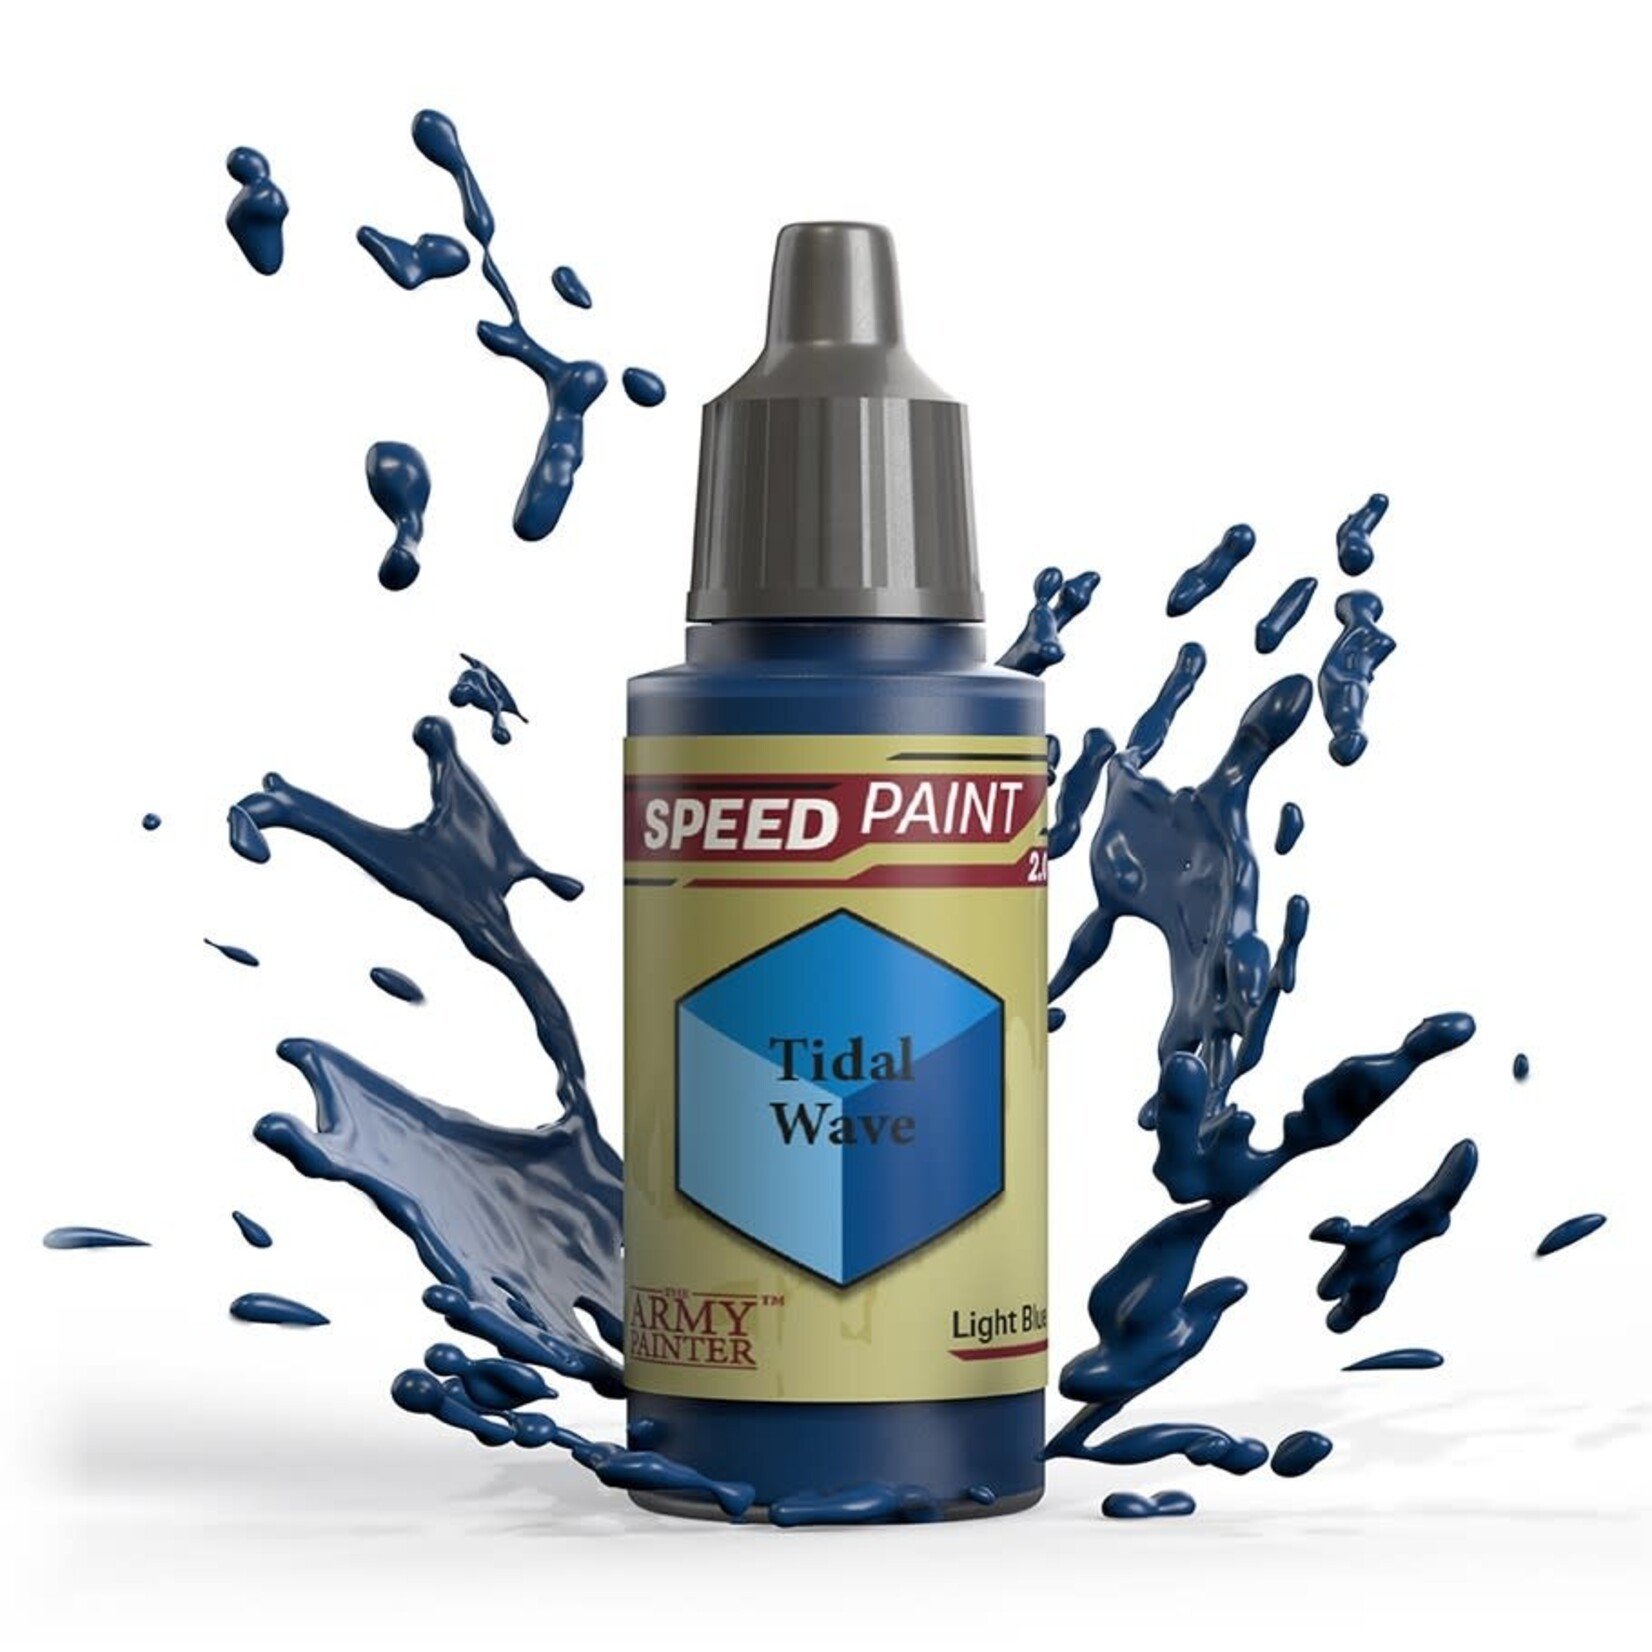 The Army Painter The Army Painter Tidal Wave 18ml